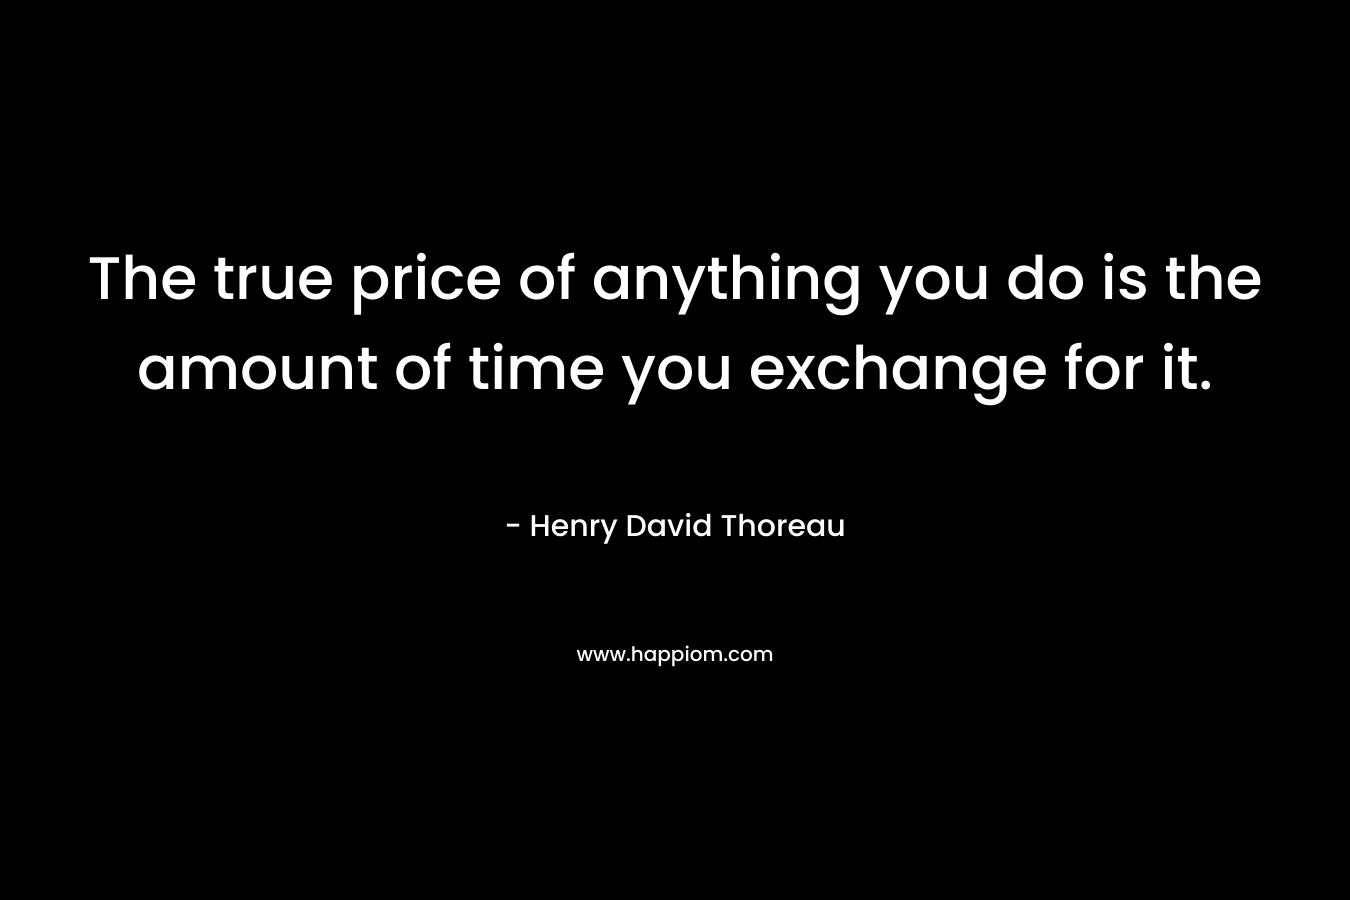 The true price of anything you do is the amount of time you exchange for it. – Henry David Thoreau